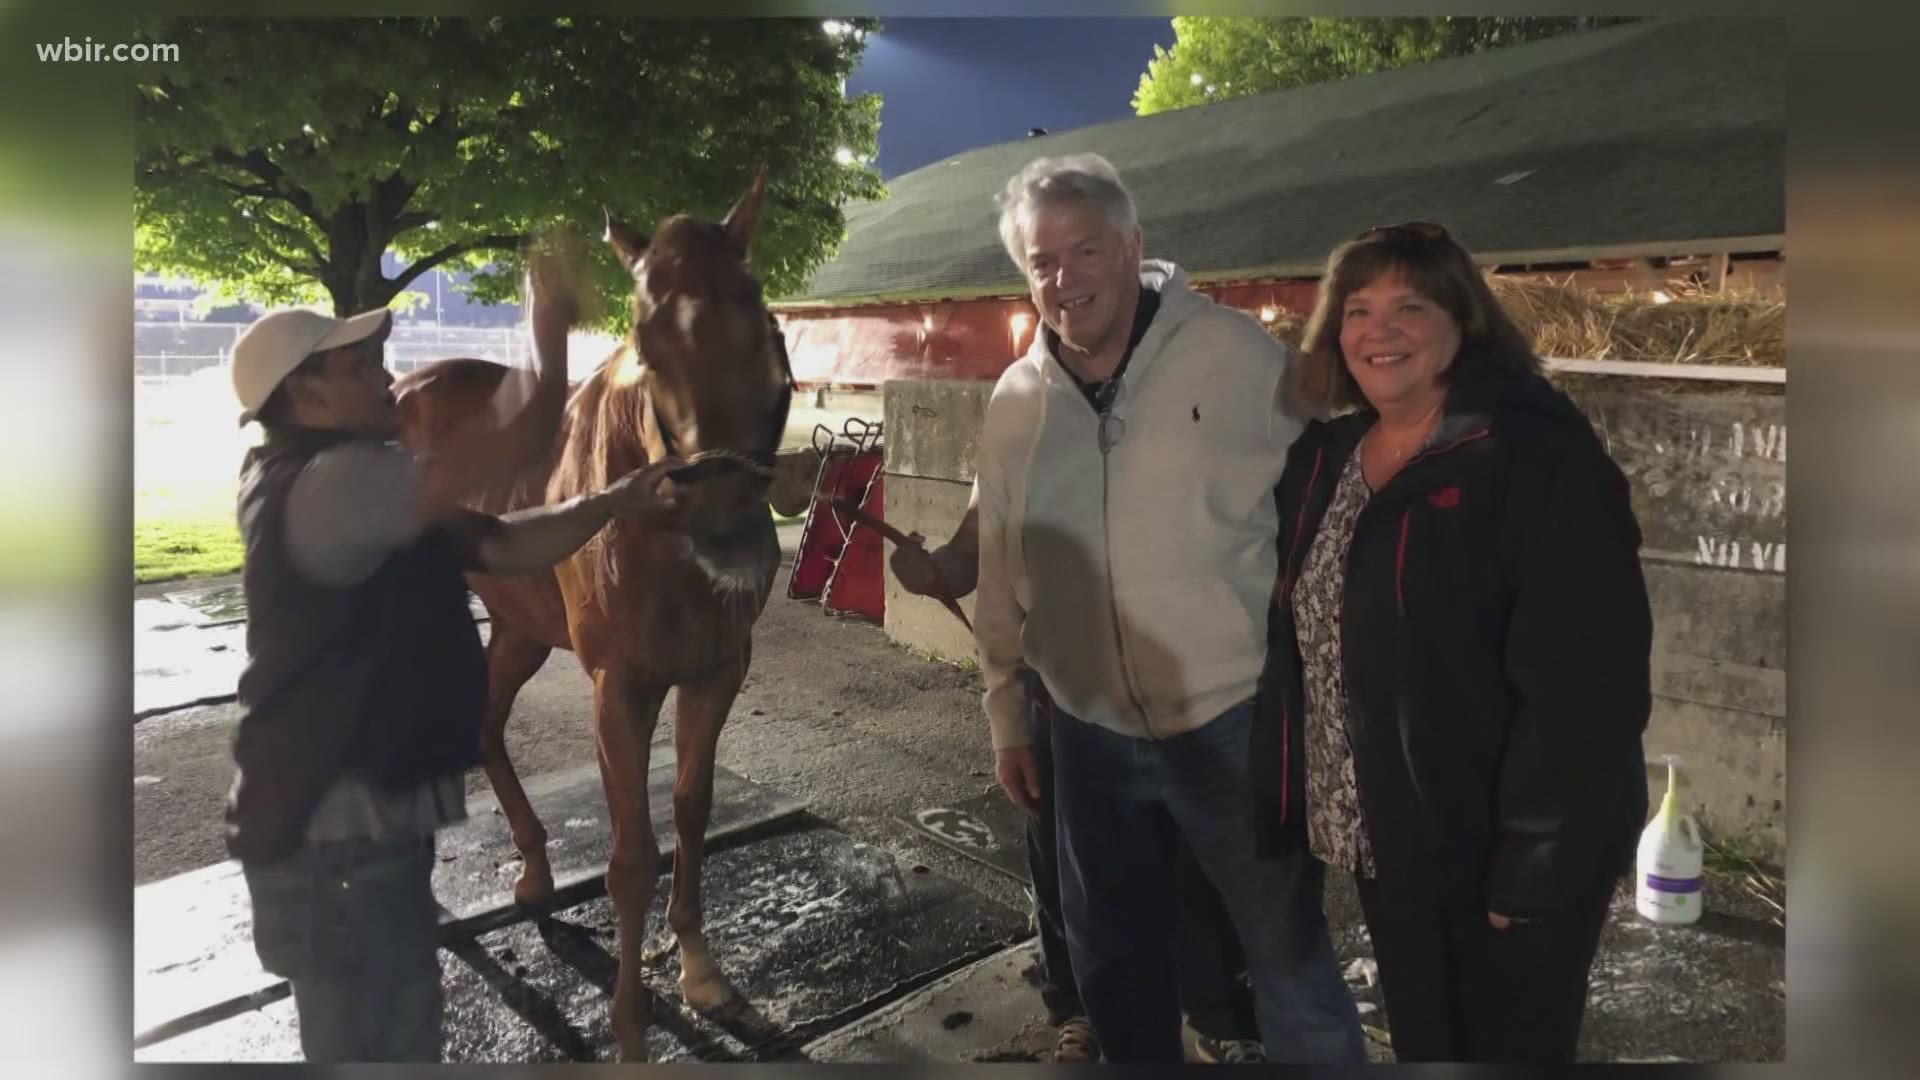 A Knoxville man's wildest dreams will come true this weekend! His horse will be racing in the Kentucky Derby.